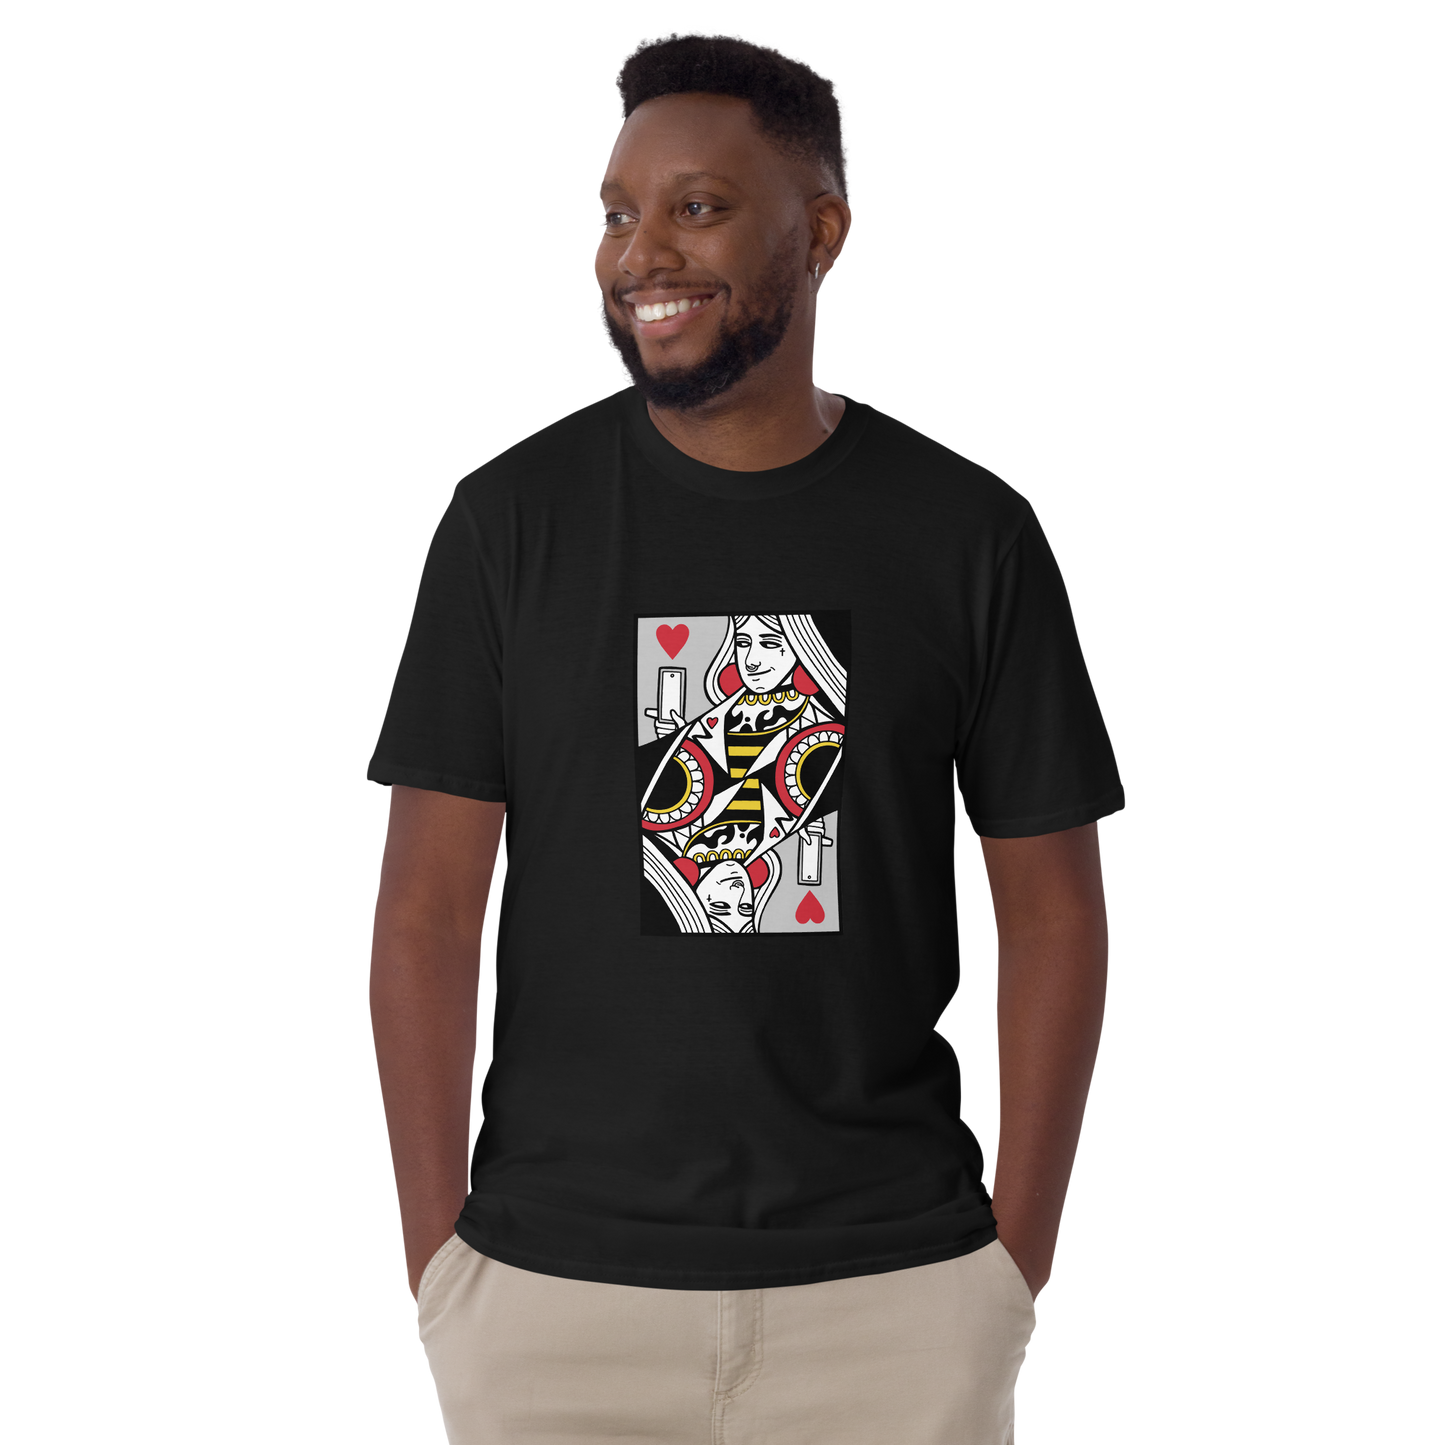 Smiling man wearing a Black Queen of Hearts Playing Card T-Shirt featuring a cool Queen of Hearts graphic on the chest - Cool Graphic Queen of Hearts Playing Card T-Shirts - Boozy Fox